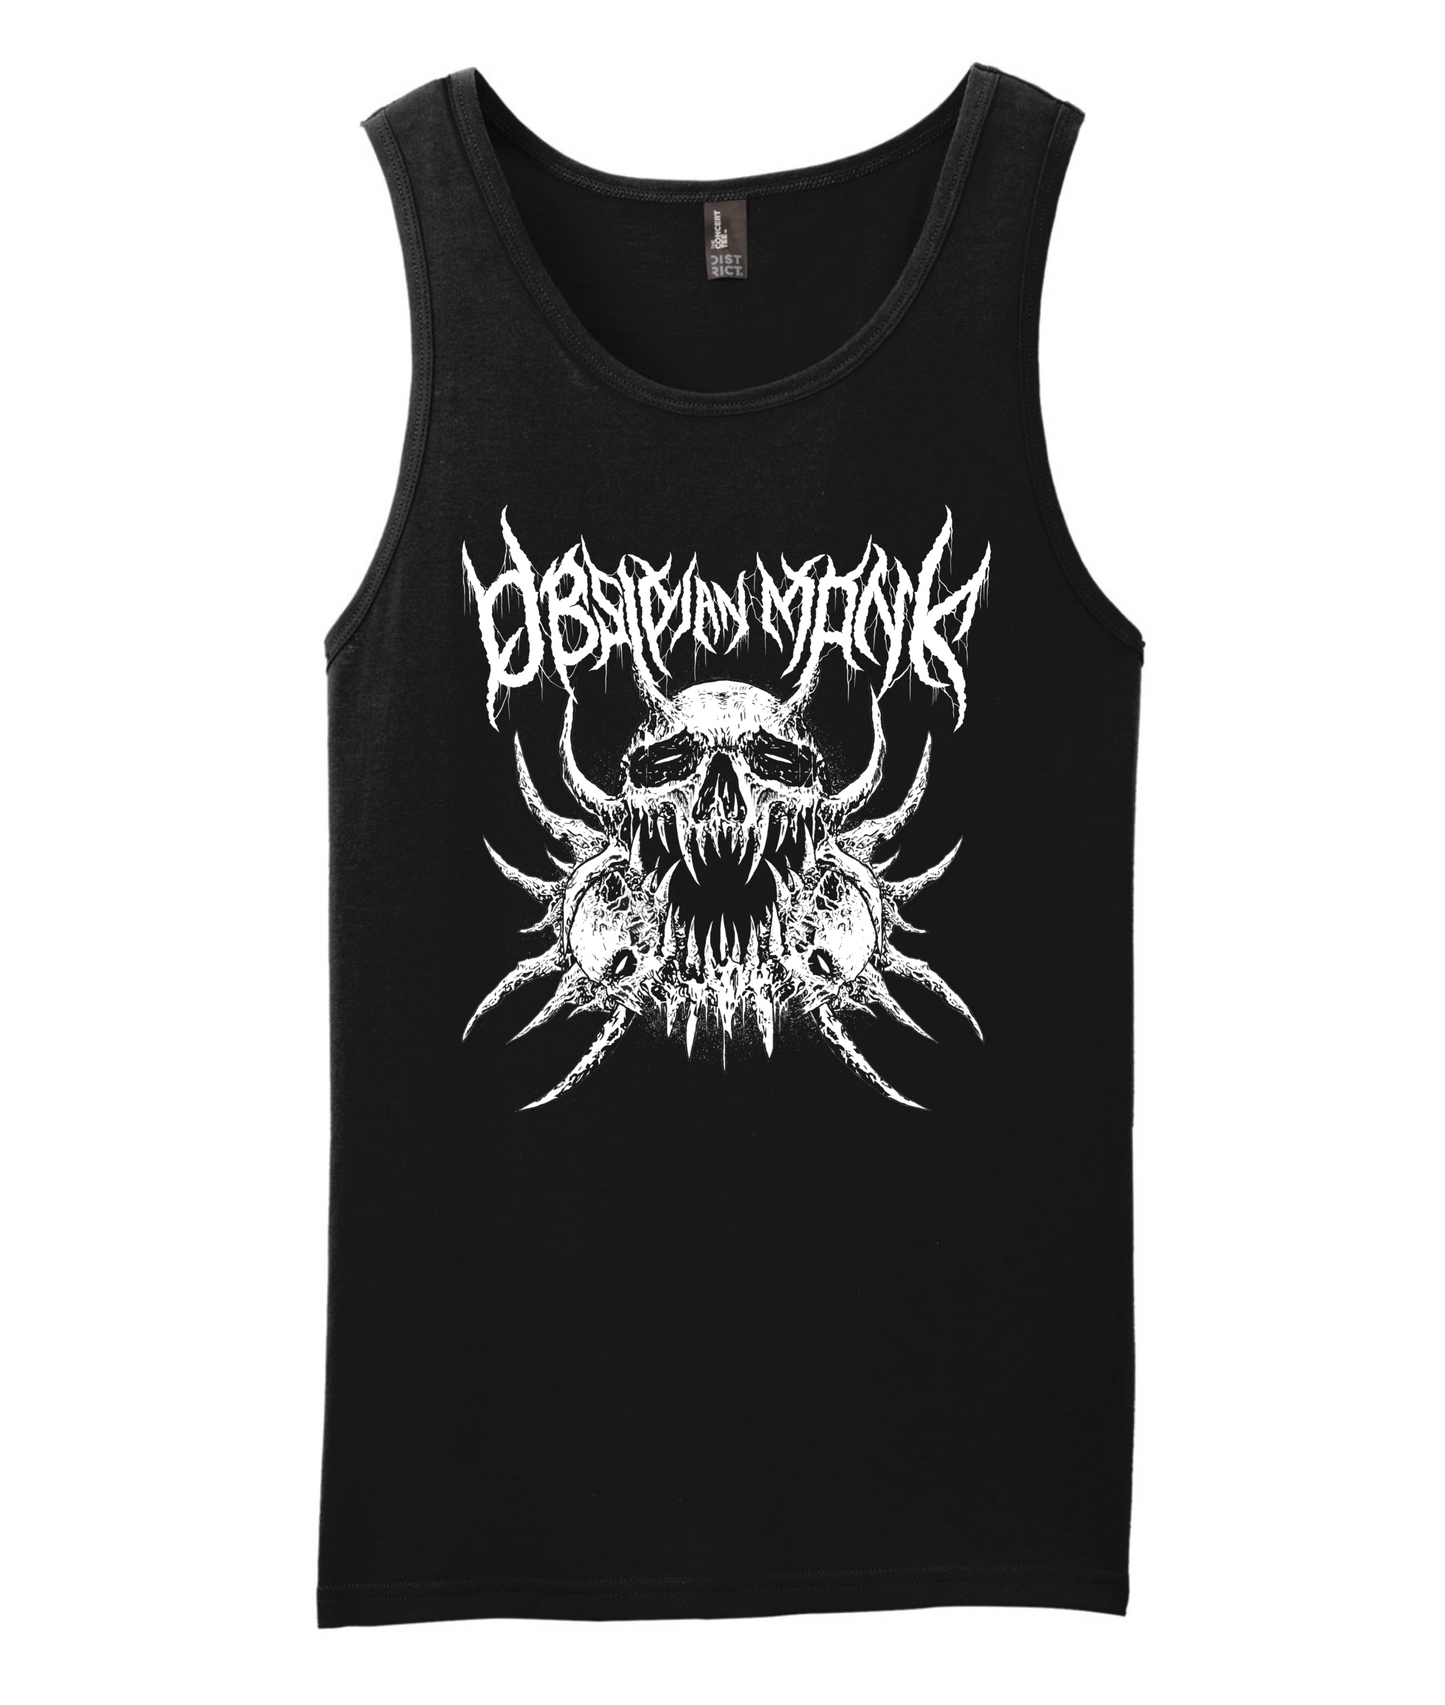 The Horror Tank Top